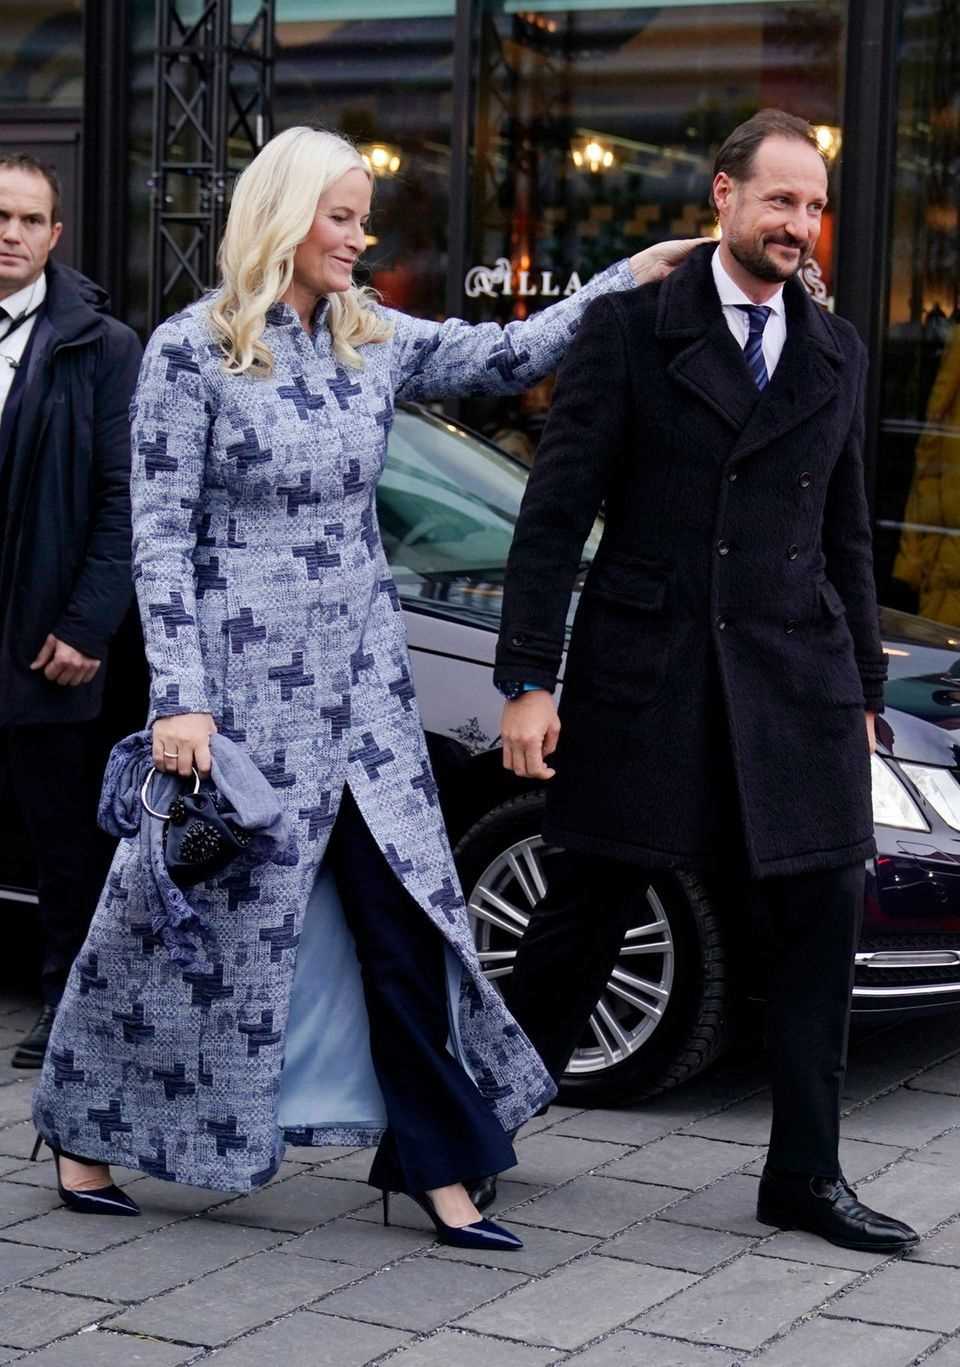 Princess Mette-Marit and Prince Hakon enjoy some togetherness at the reopening of the Munch Museum in Oslo. 